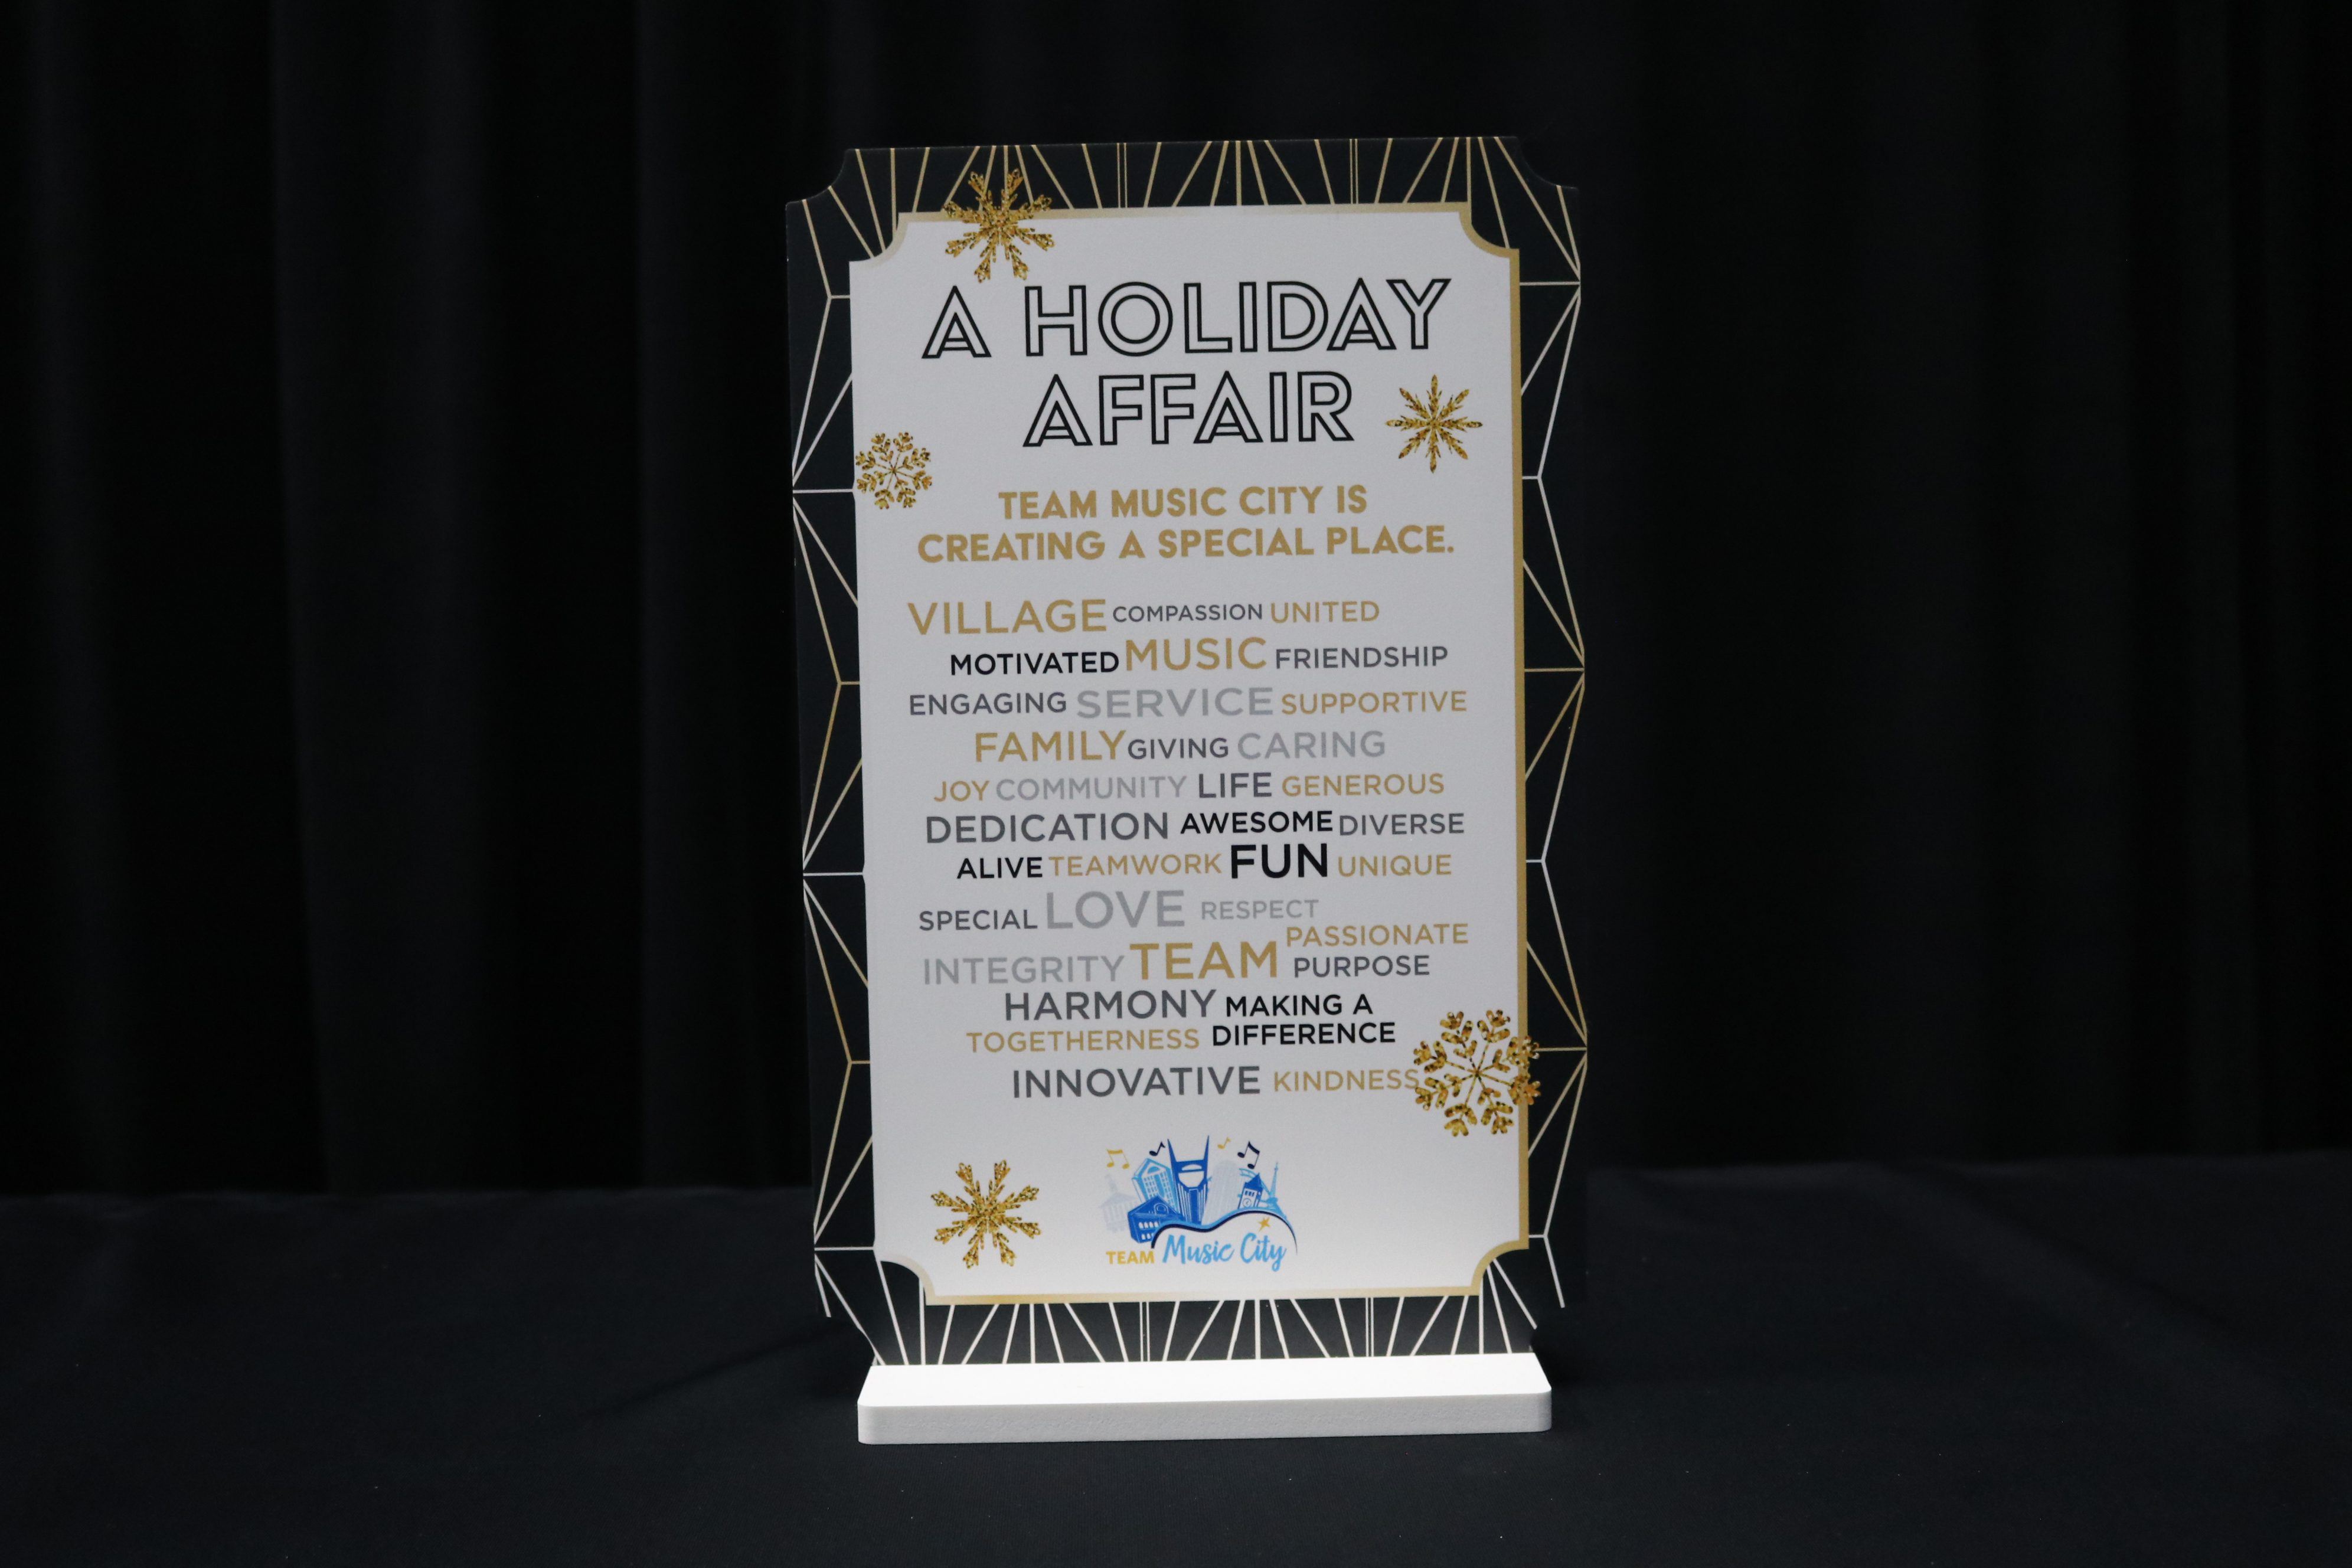 Table top display printed on PVC and inserted into base for a holiday party.